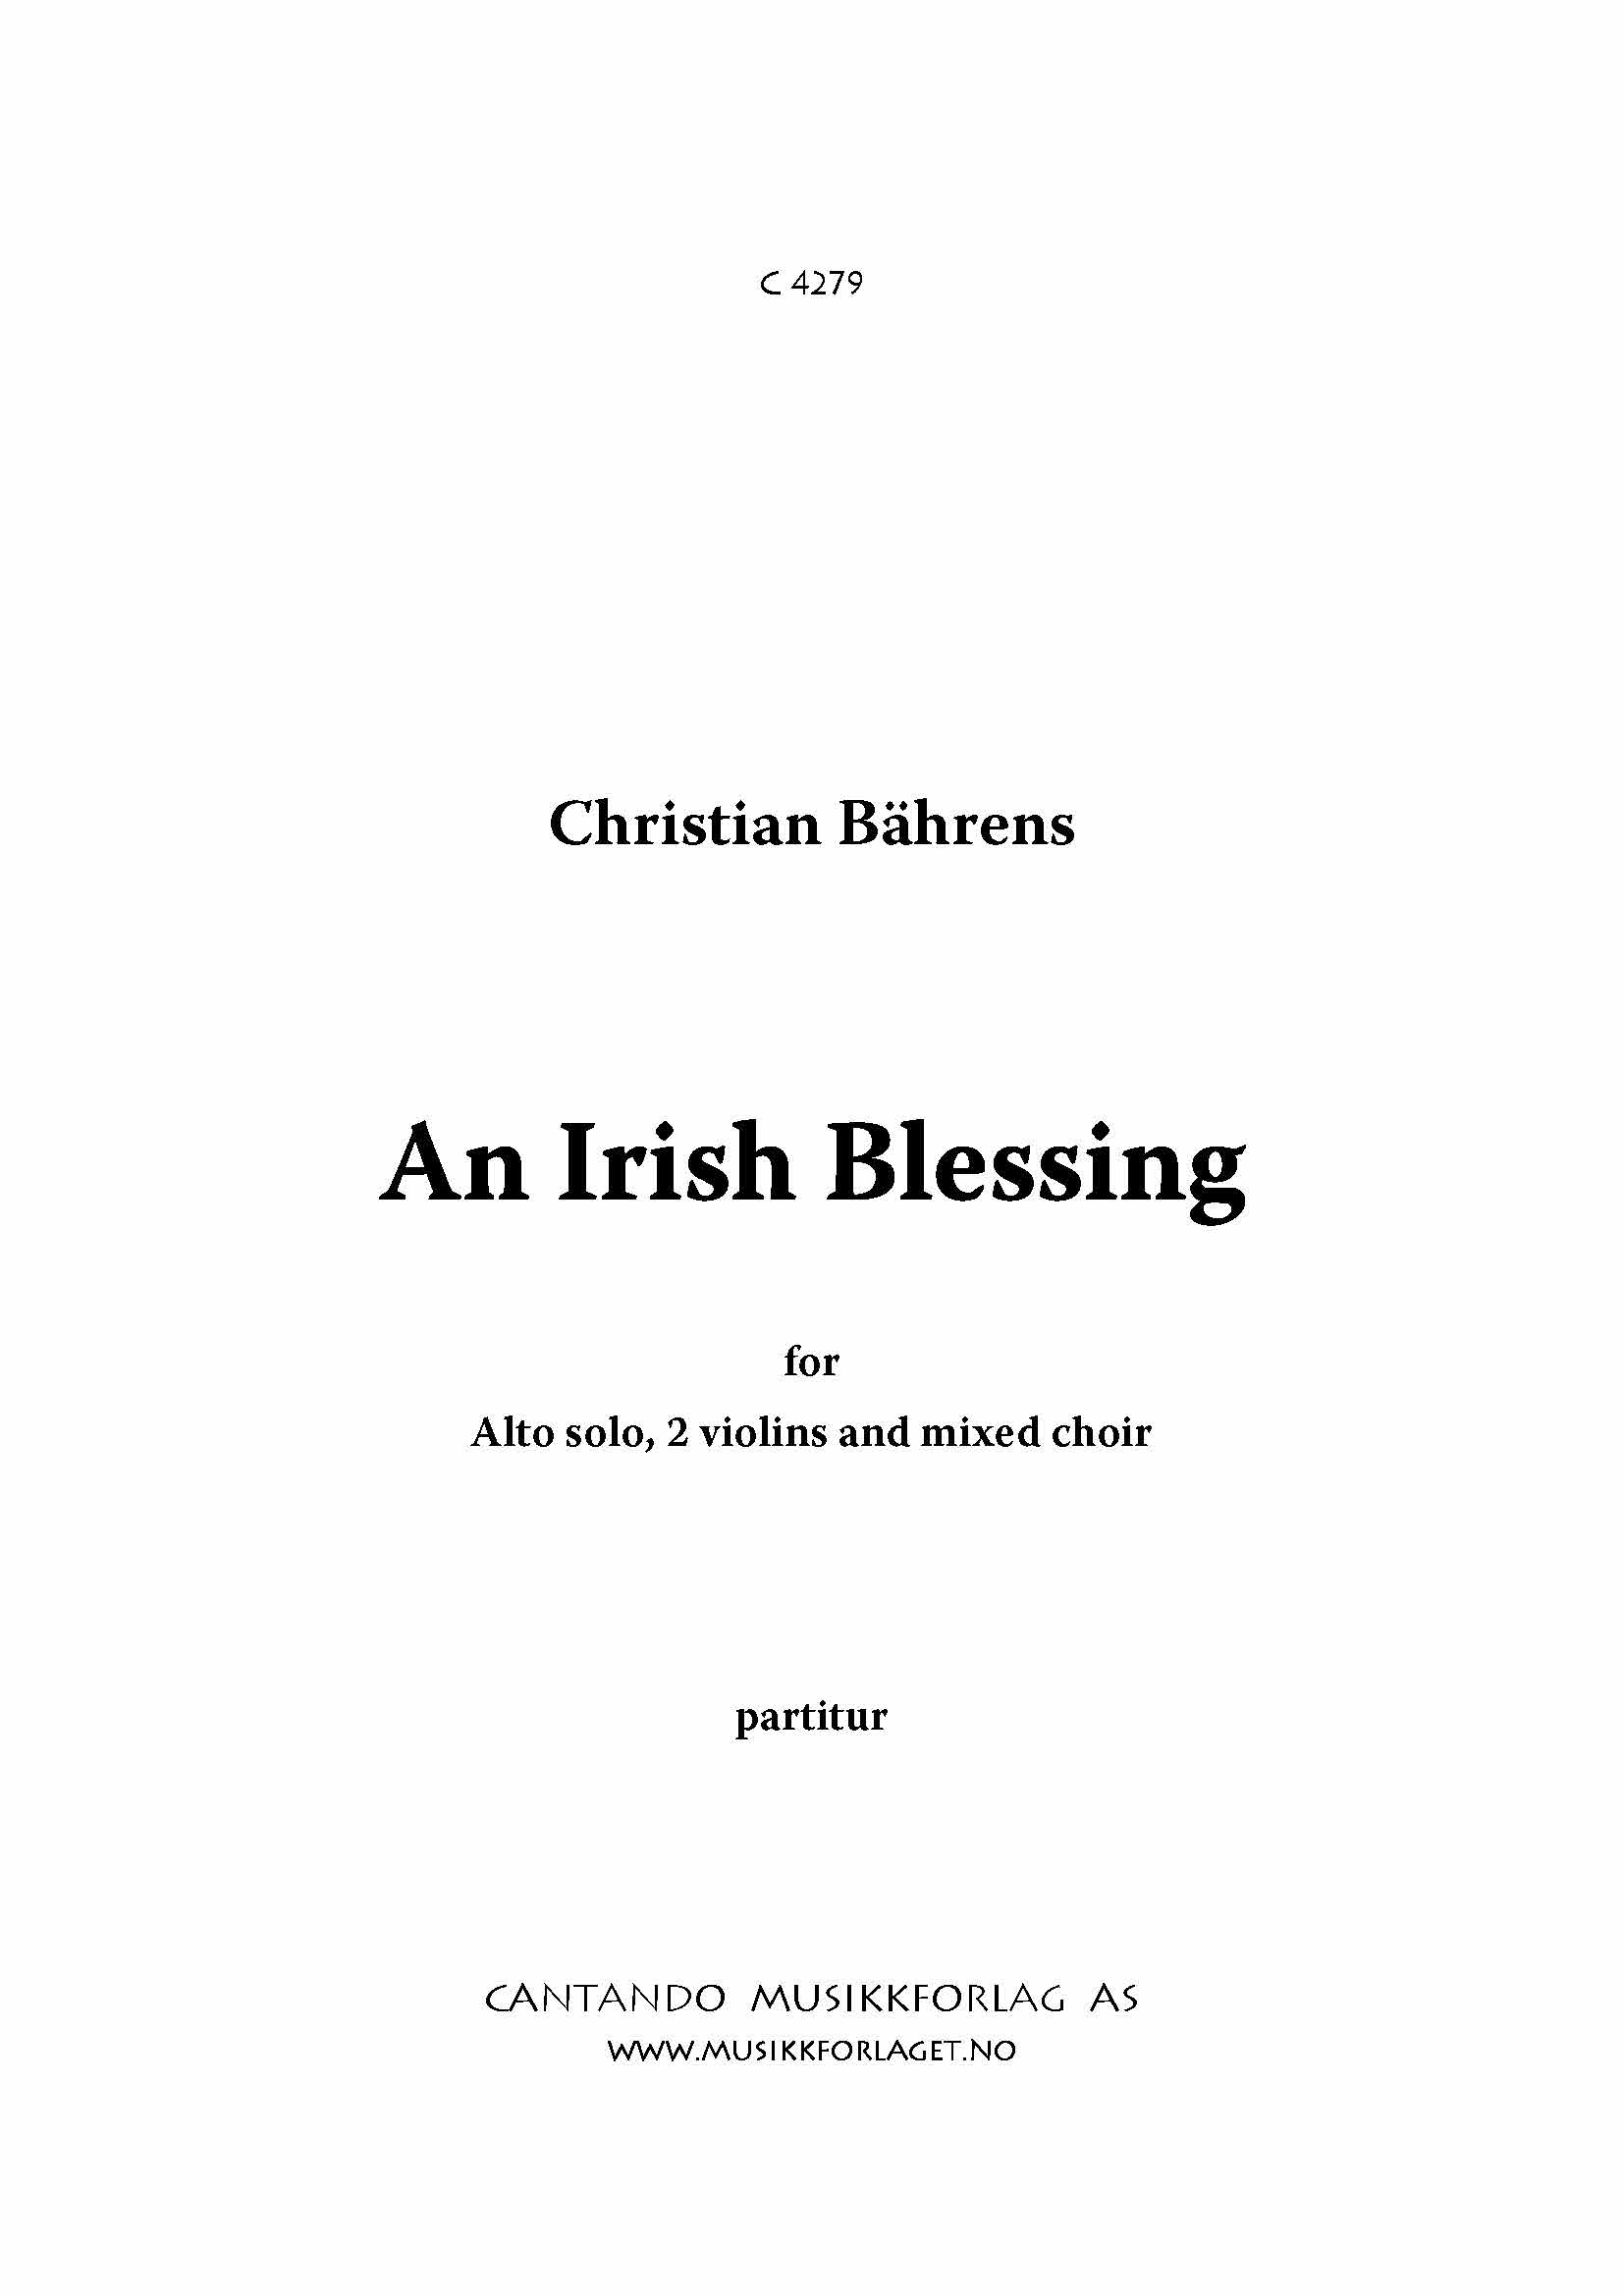 An Irish Blessing - Alto solo, 2 violins and mixed choir